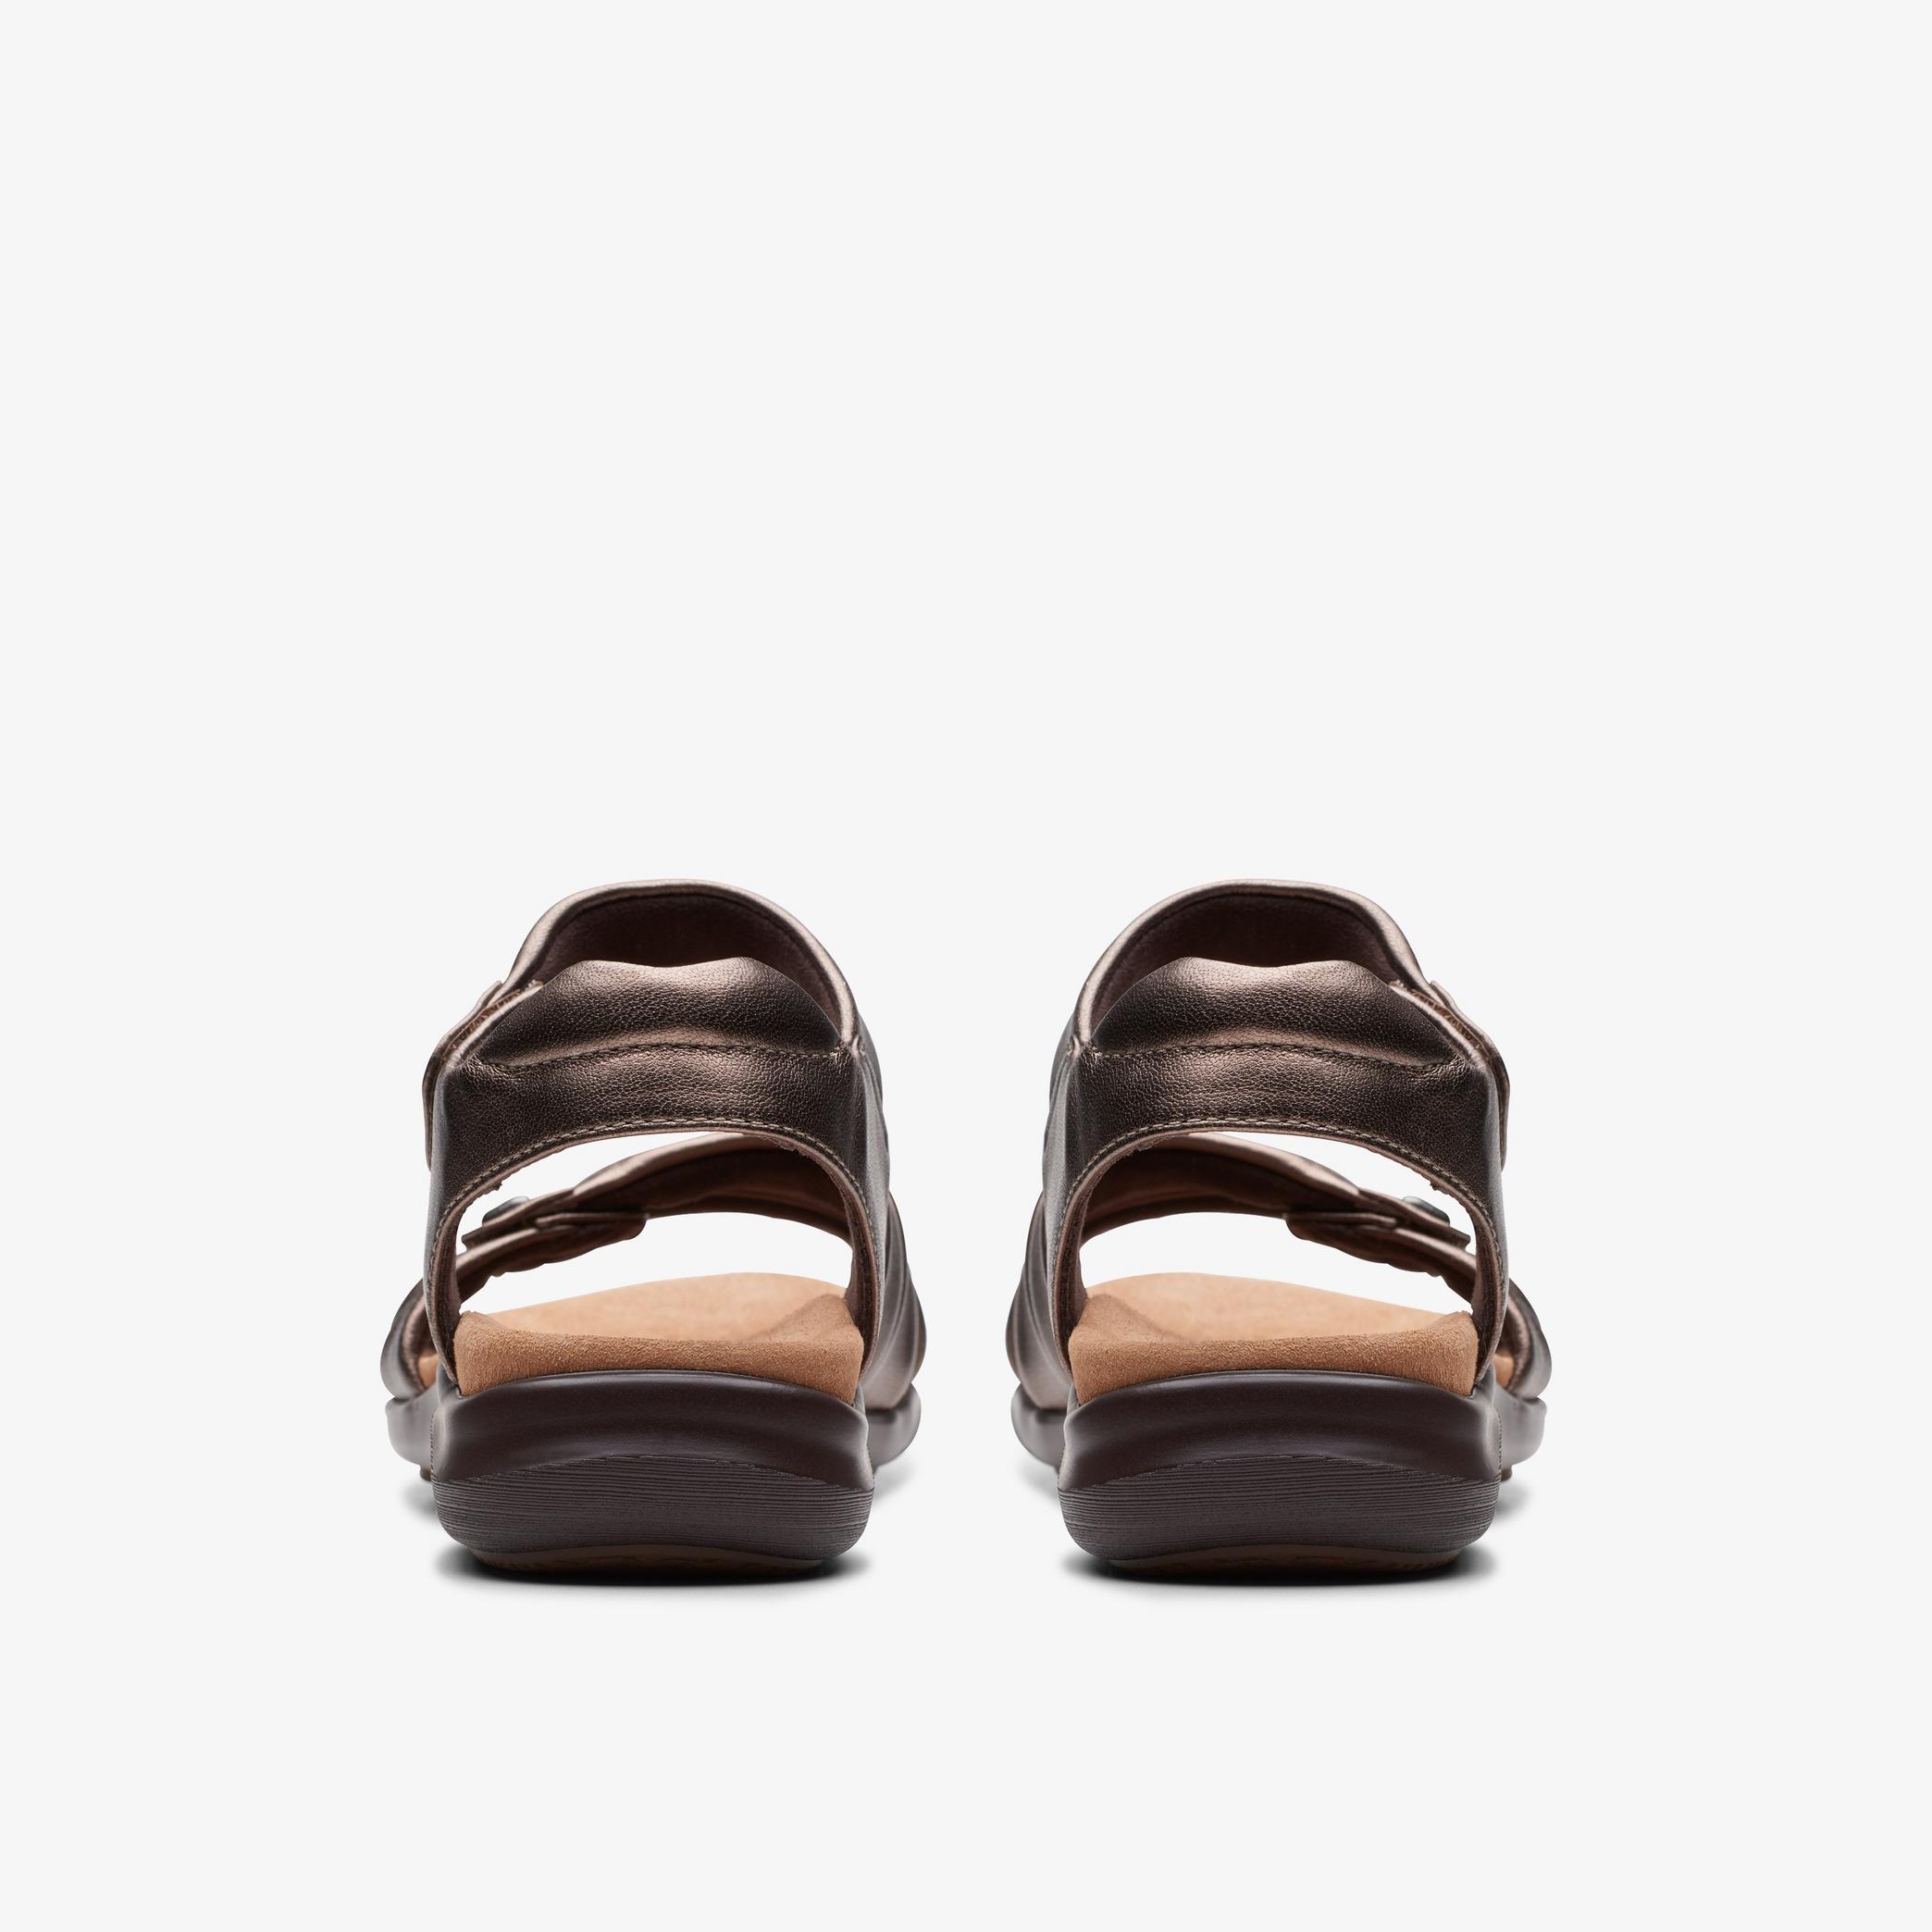 WOMENS Kitly Ave Bronze Leather Flat Sandals | Clarks US